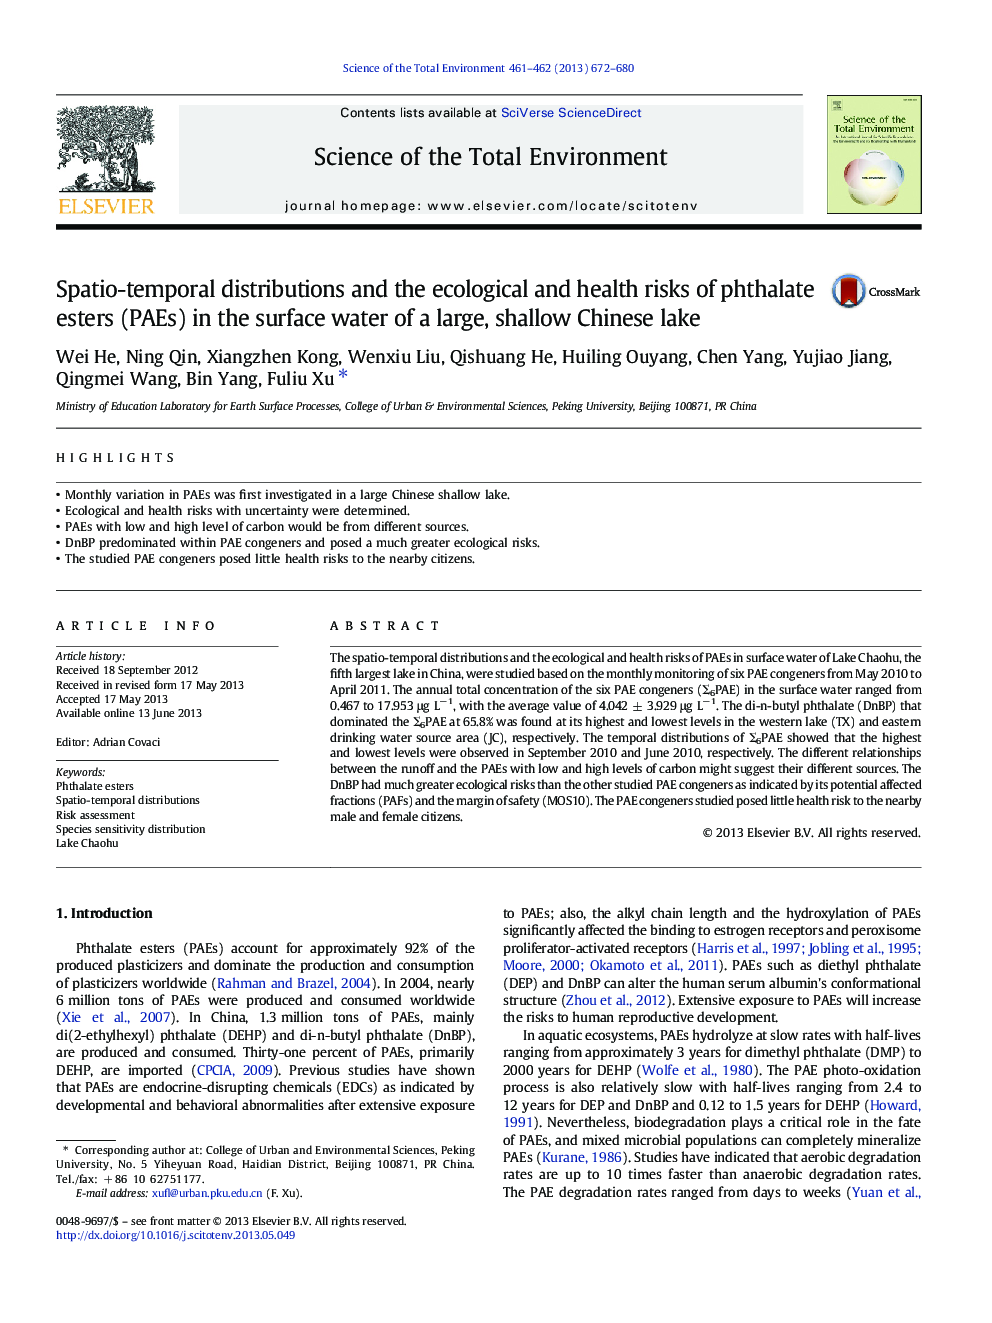 Spatio-temporal distributions and the ecological and health risks of phthalate esters (PAEs) in the surface water of a large, shallow Chinese lake